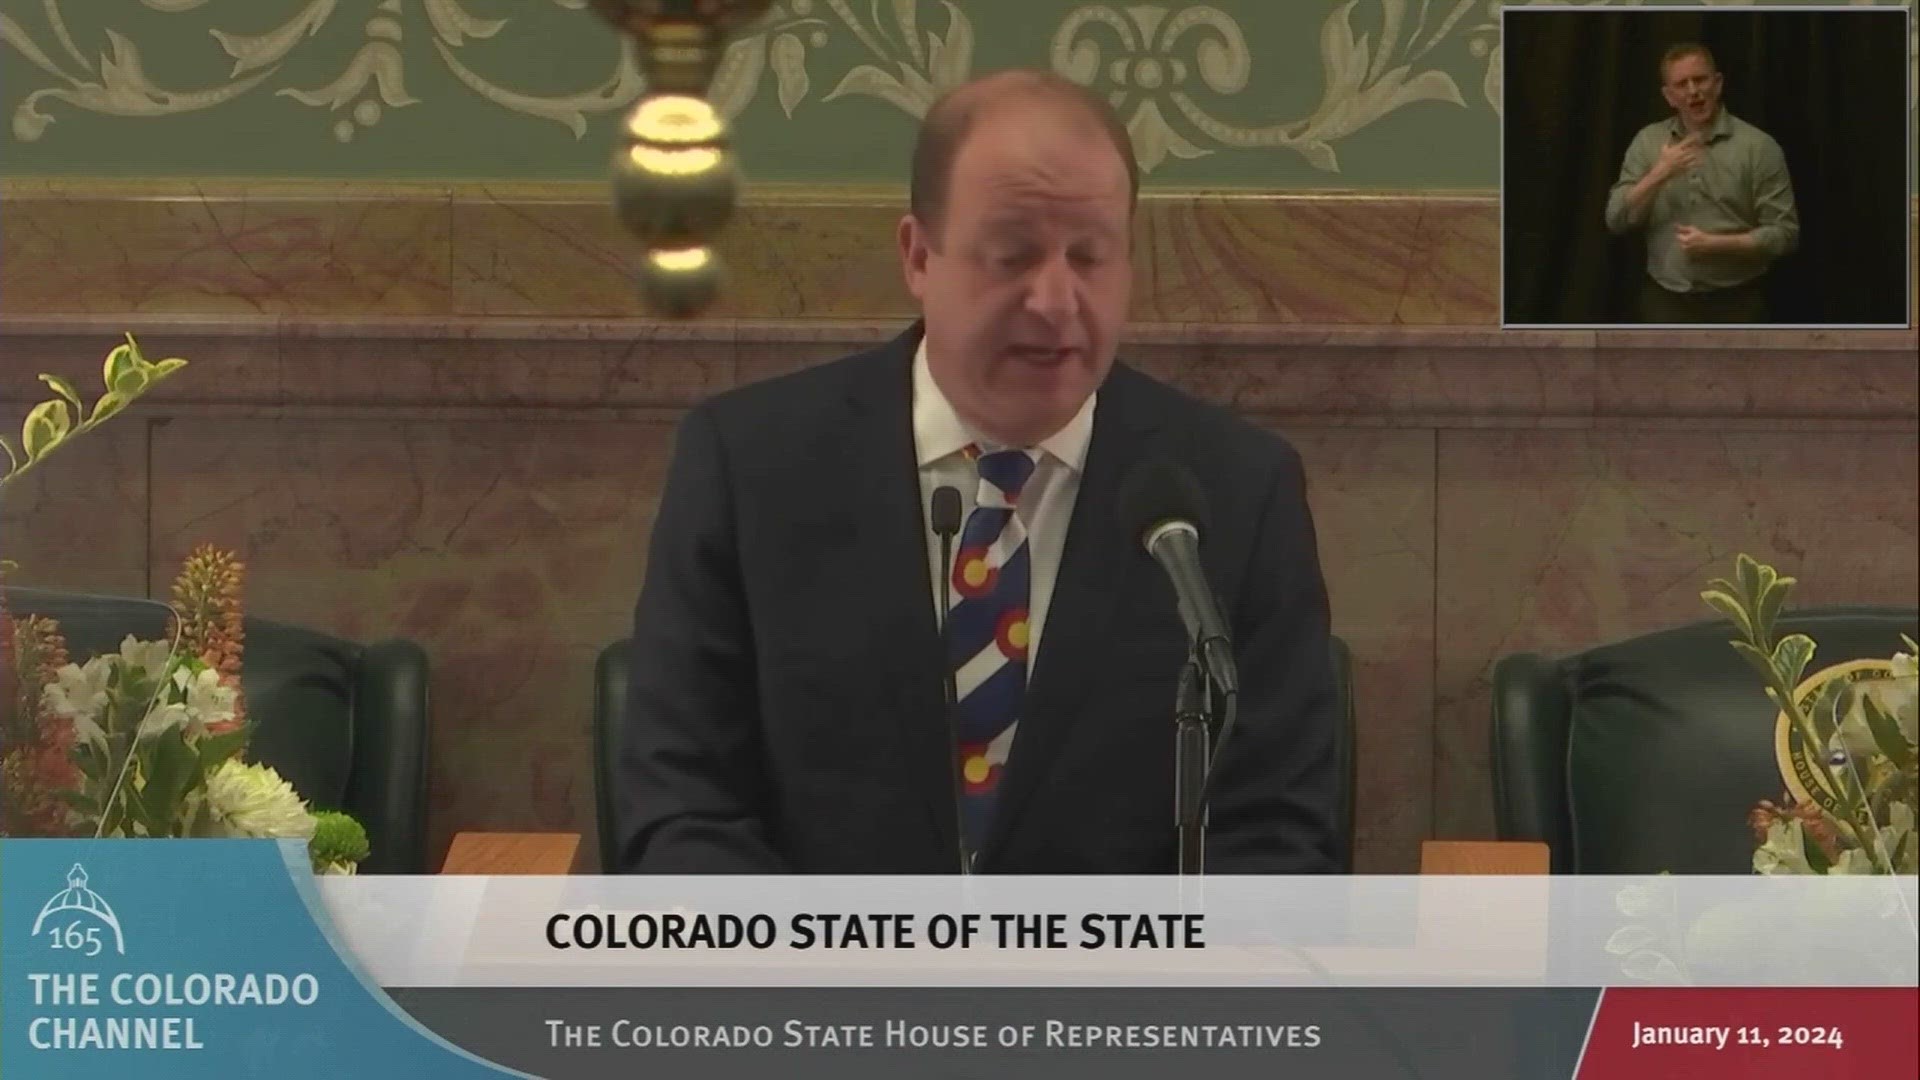 Colorado Gov. Jared Polis laid out his priorities for the coming year during Thursday's speech.